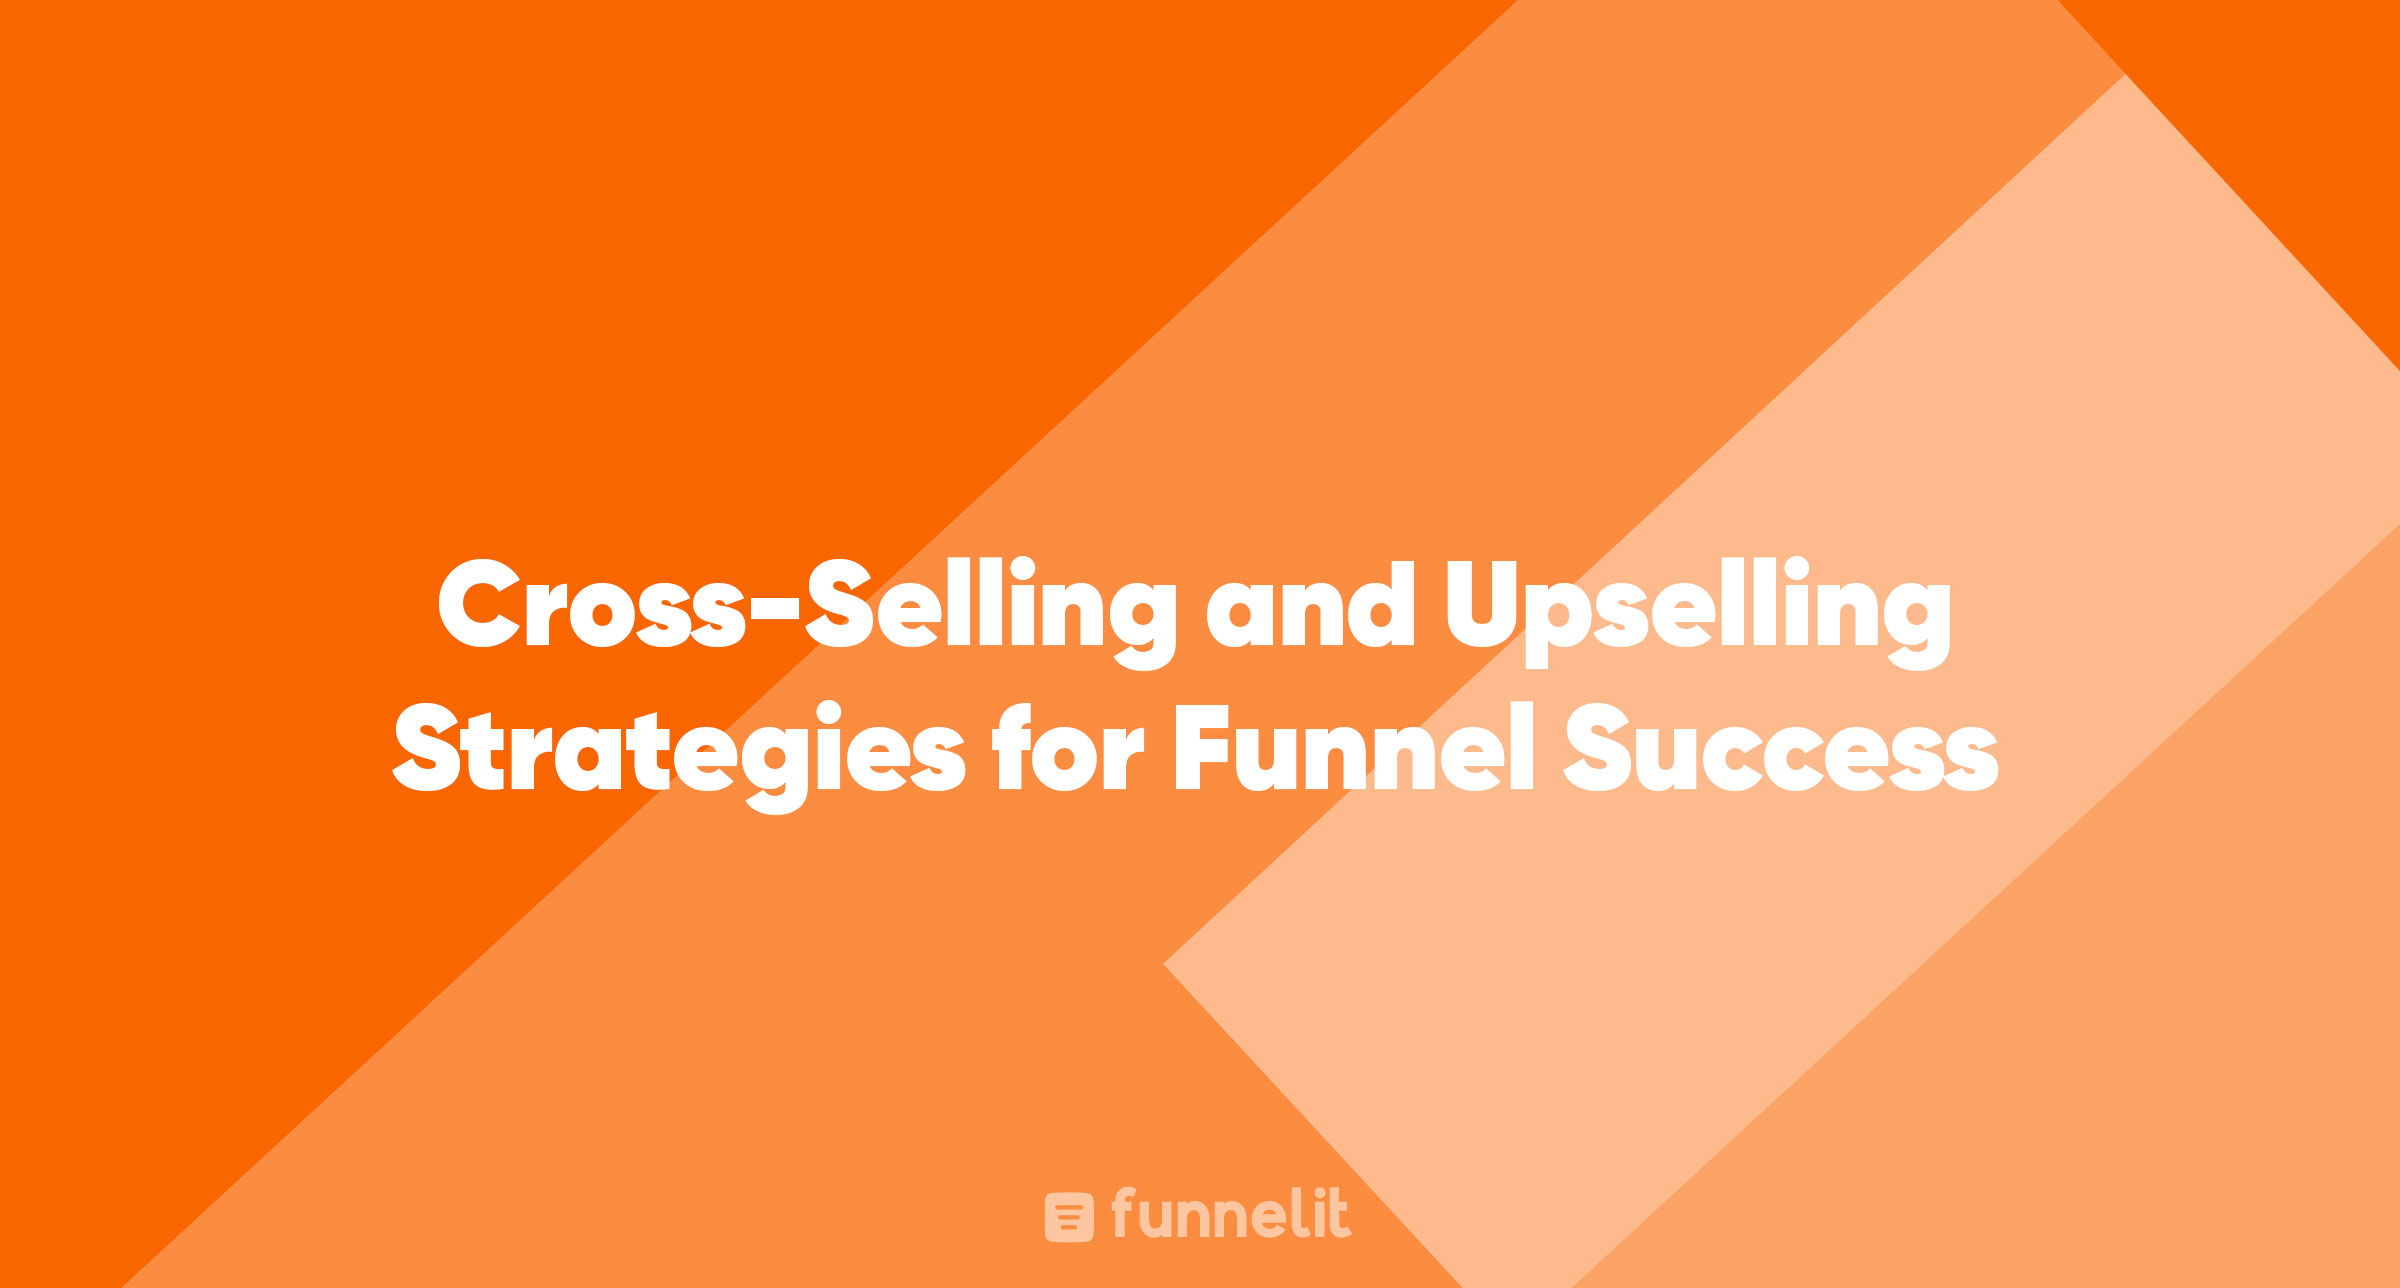 Article | Cross-Selling and Upselling Strategies for Funnel Success